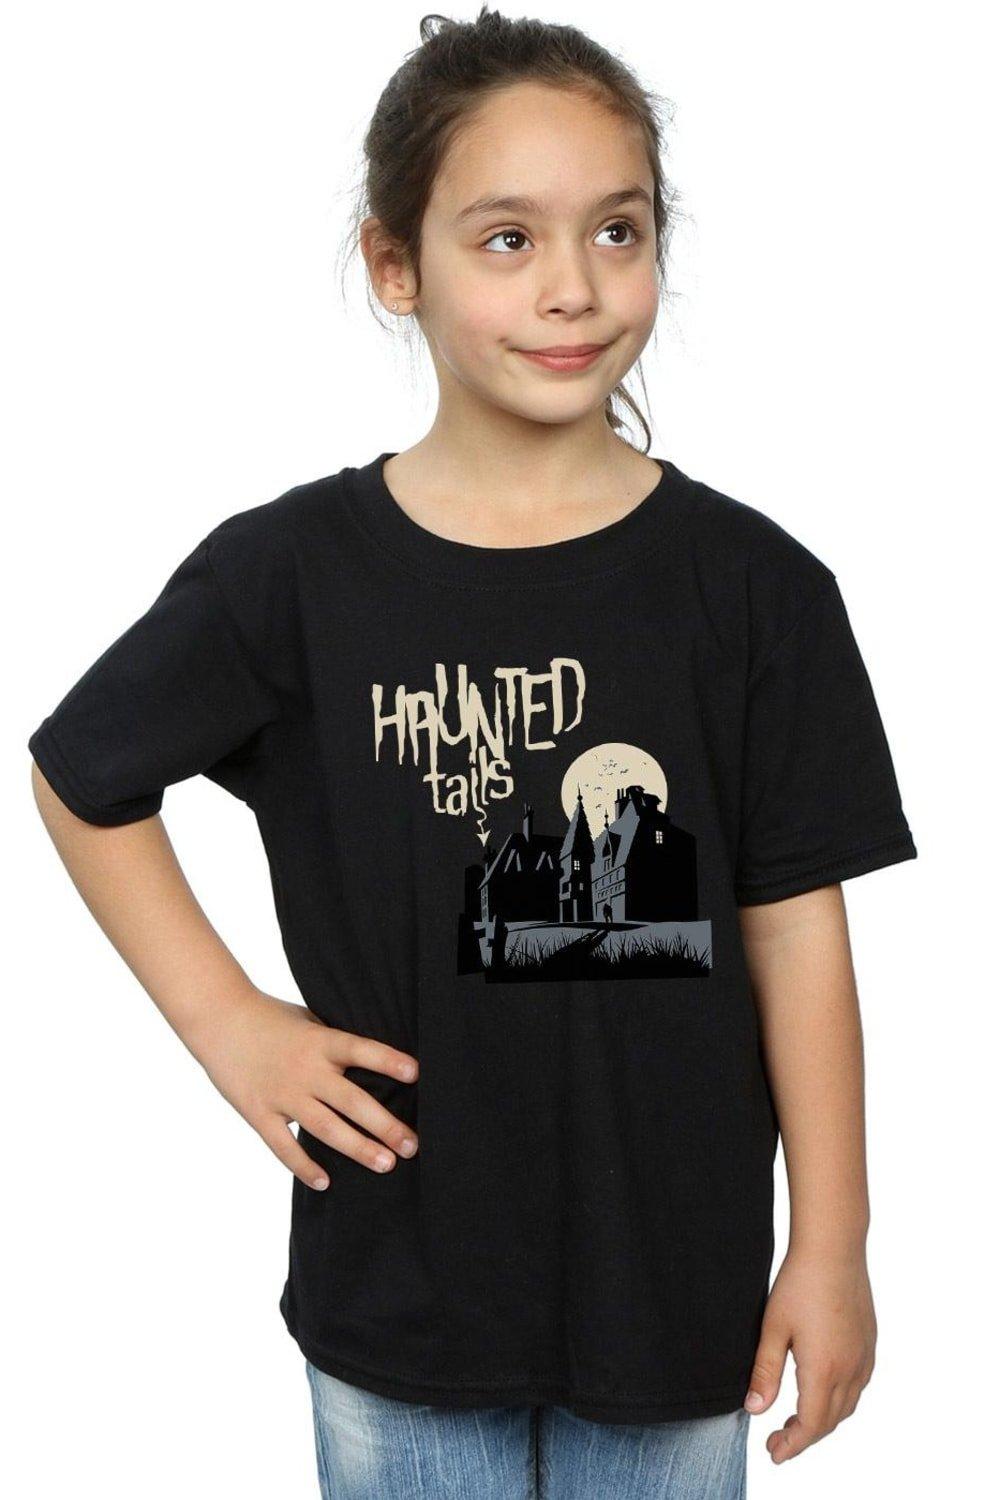 Haunted Tails Cotton T-Shirt